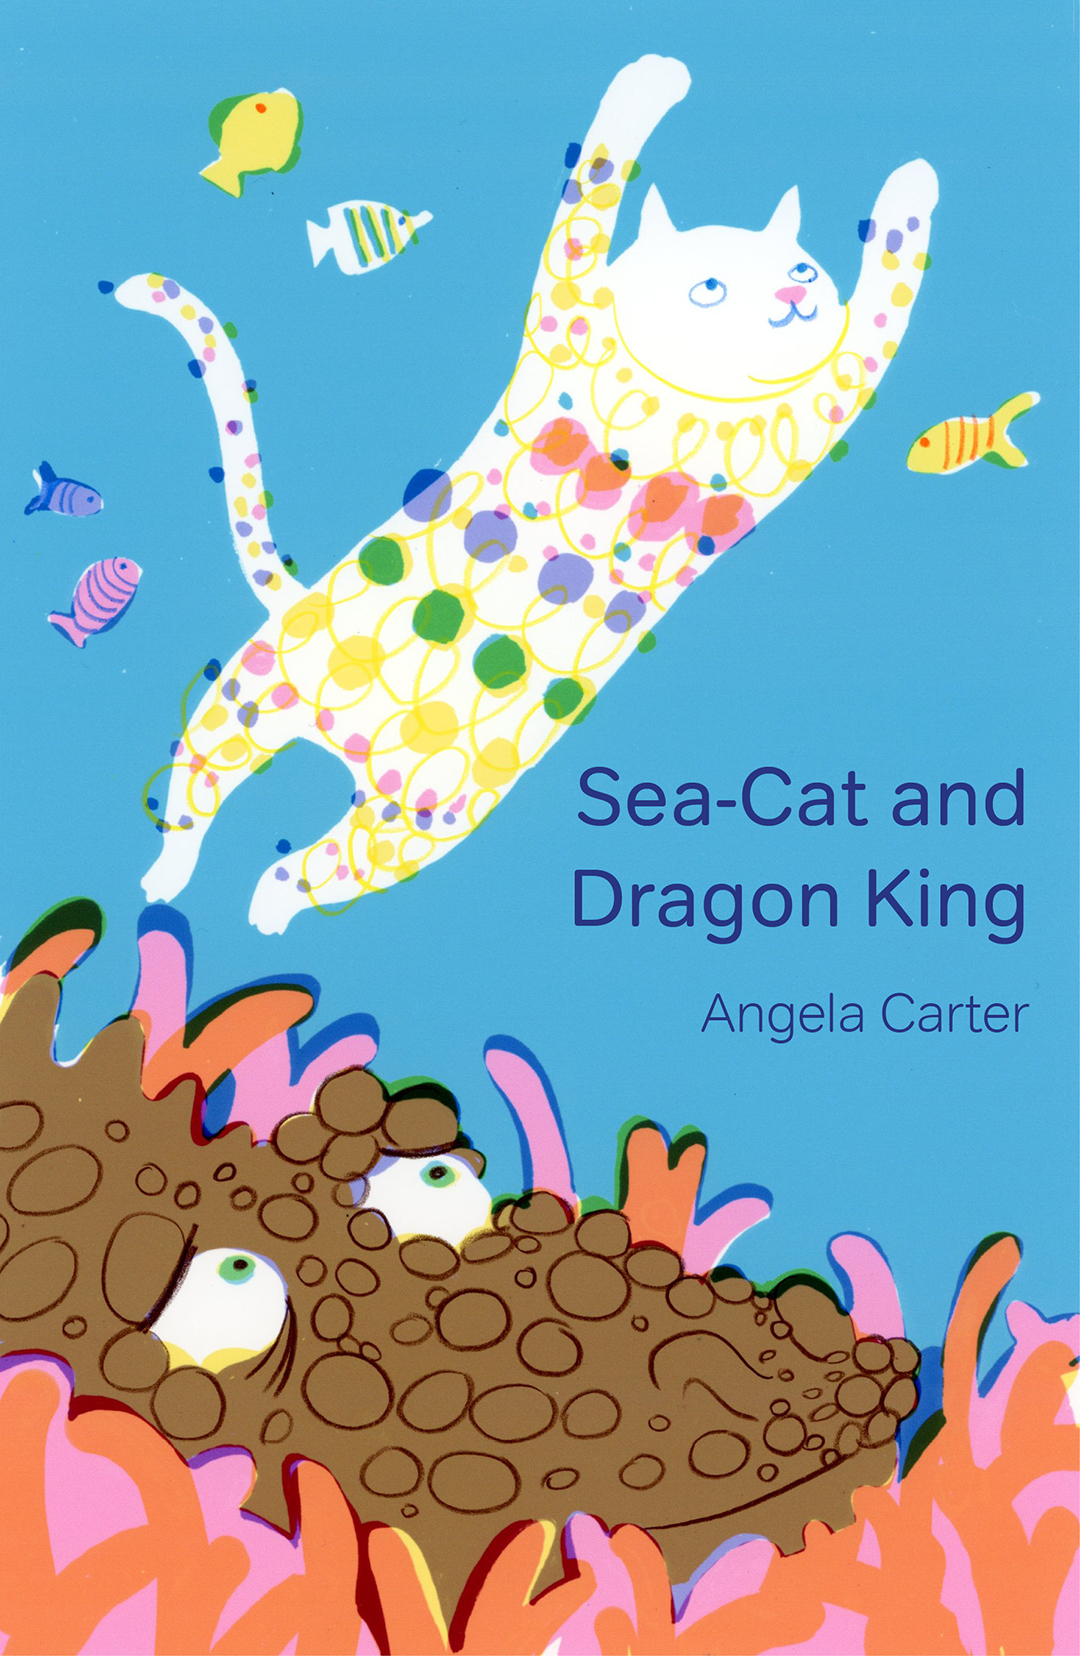 "Sea-Cat and Dragon King." Book cover for the children’s book by Angela Carter.